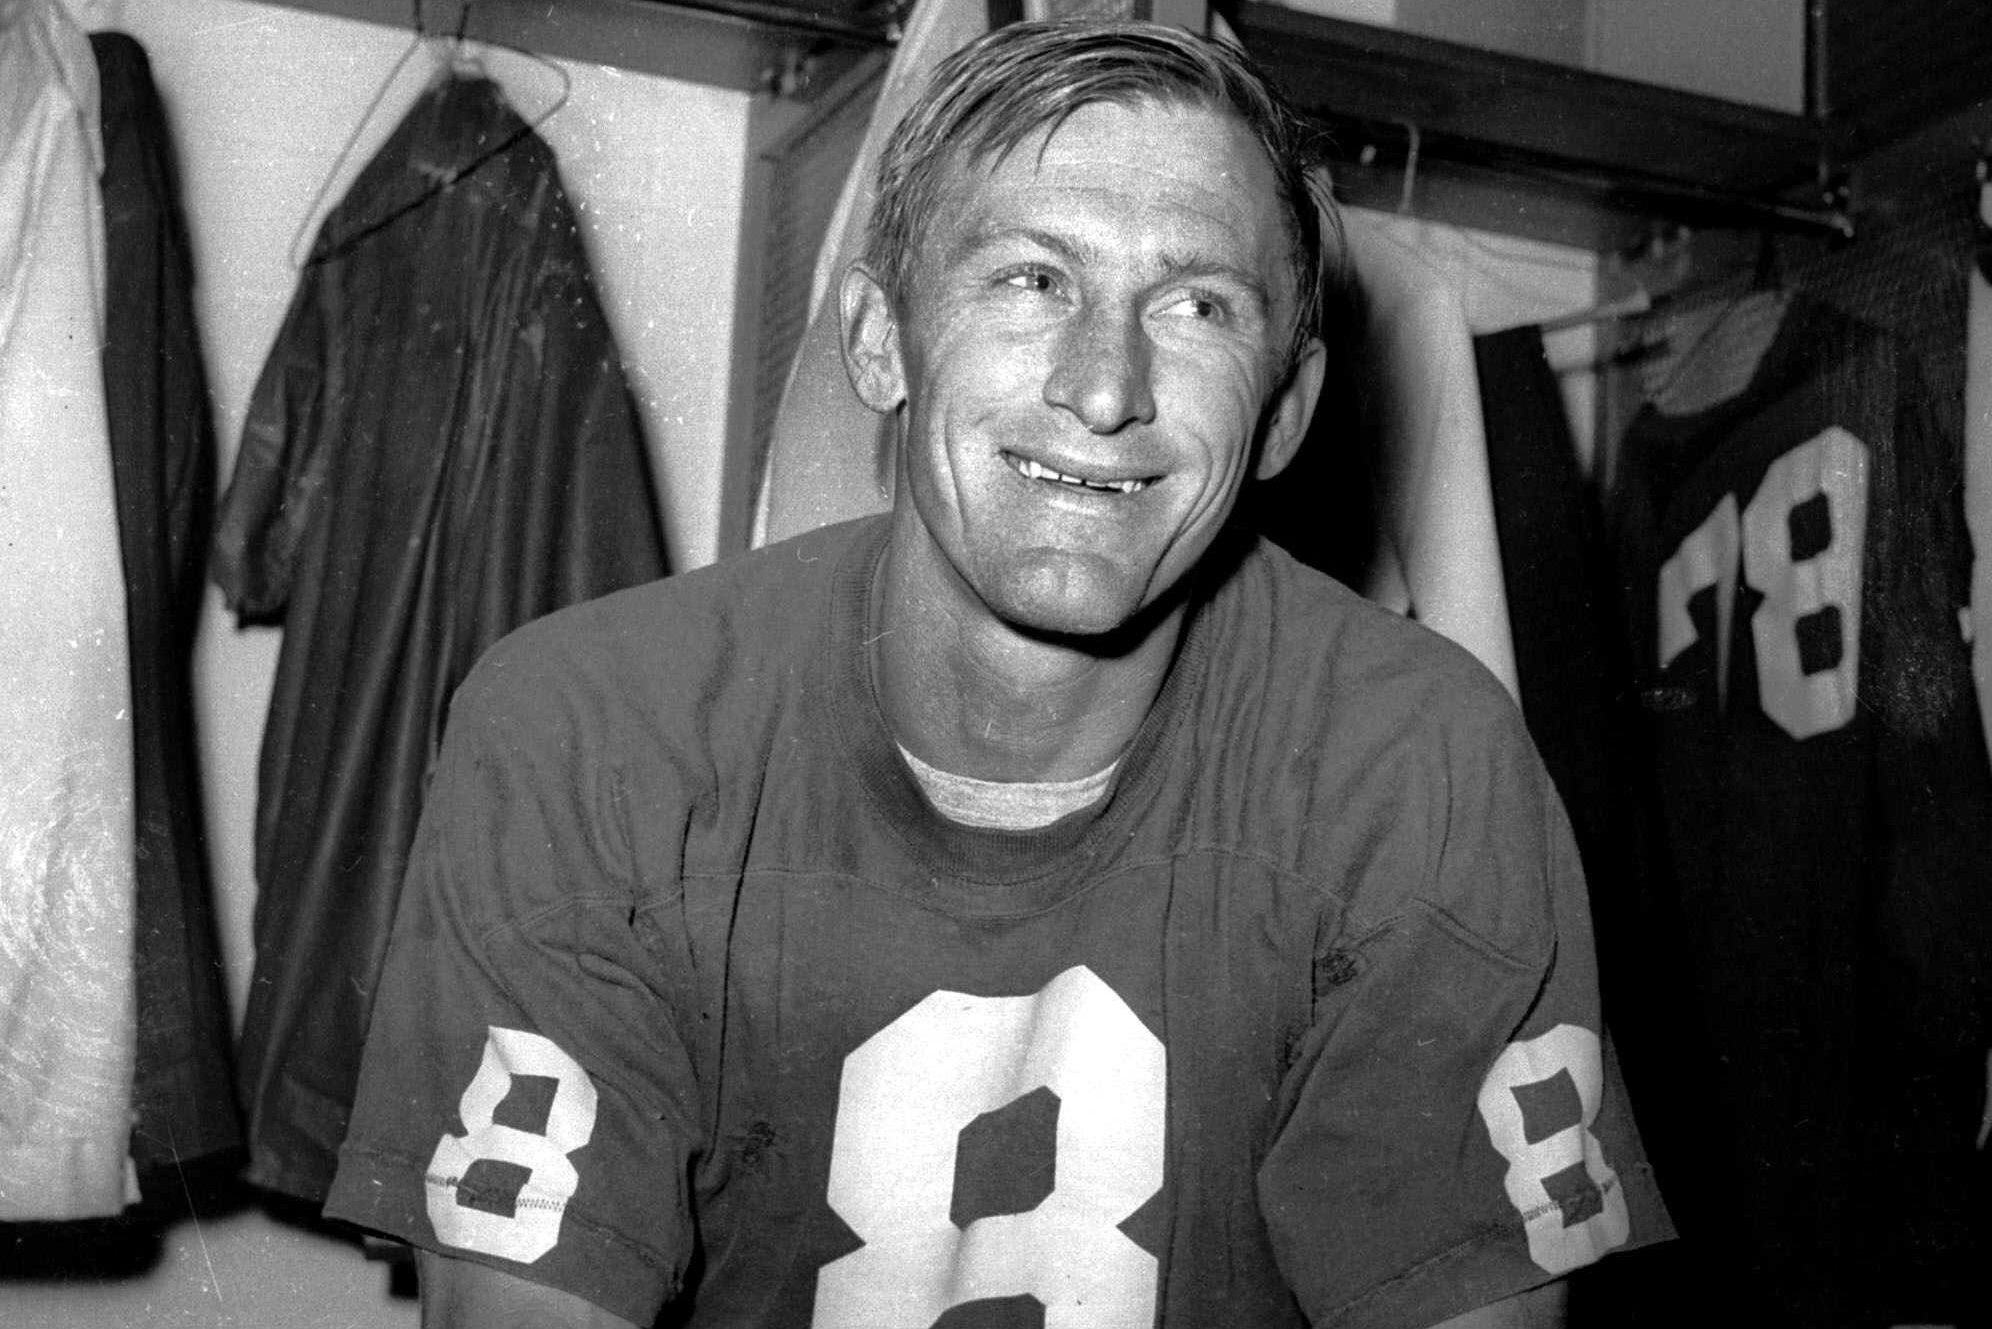 R.I.P. No. 8: Former St. Louis football Cardinal great Larry